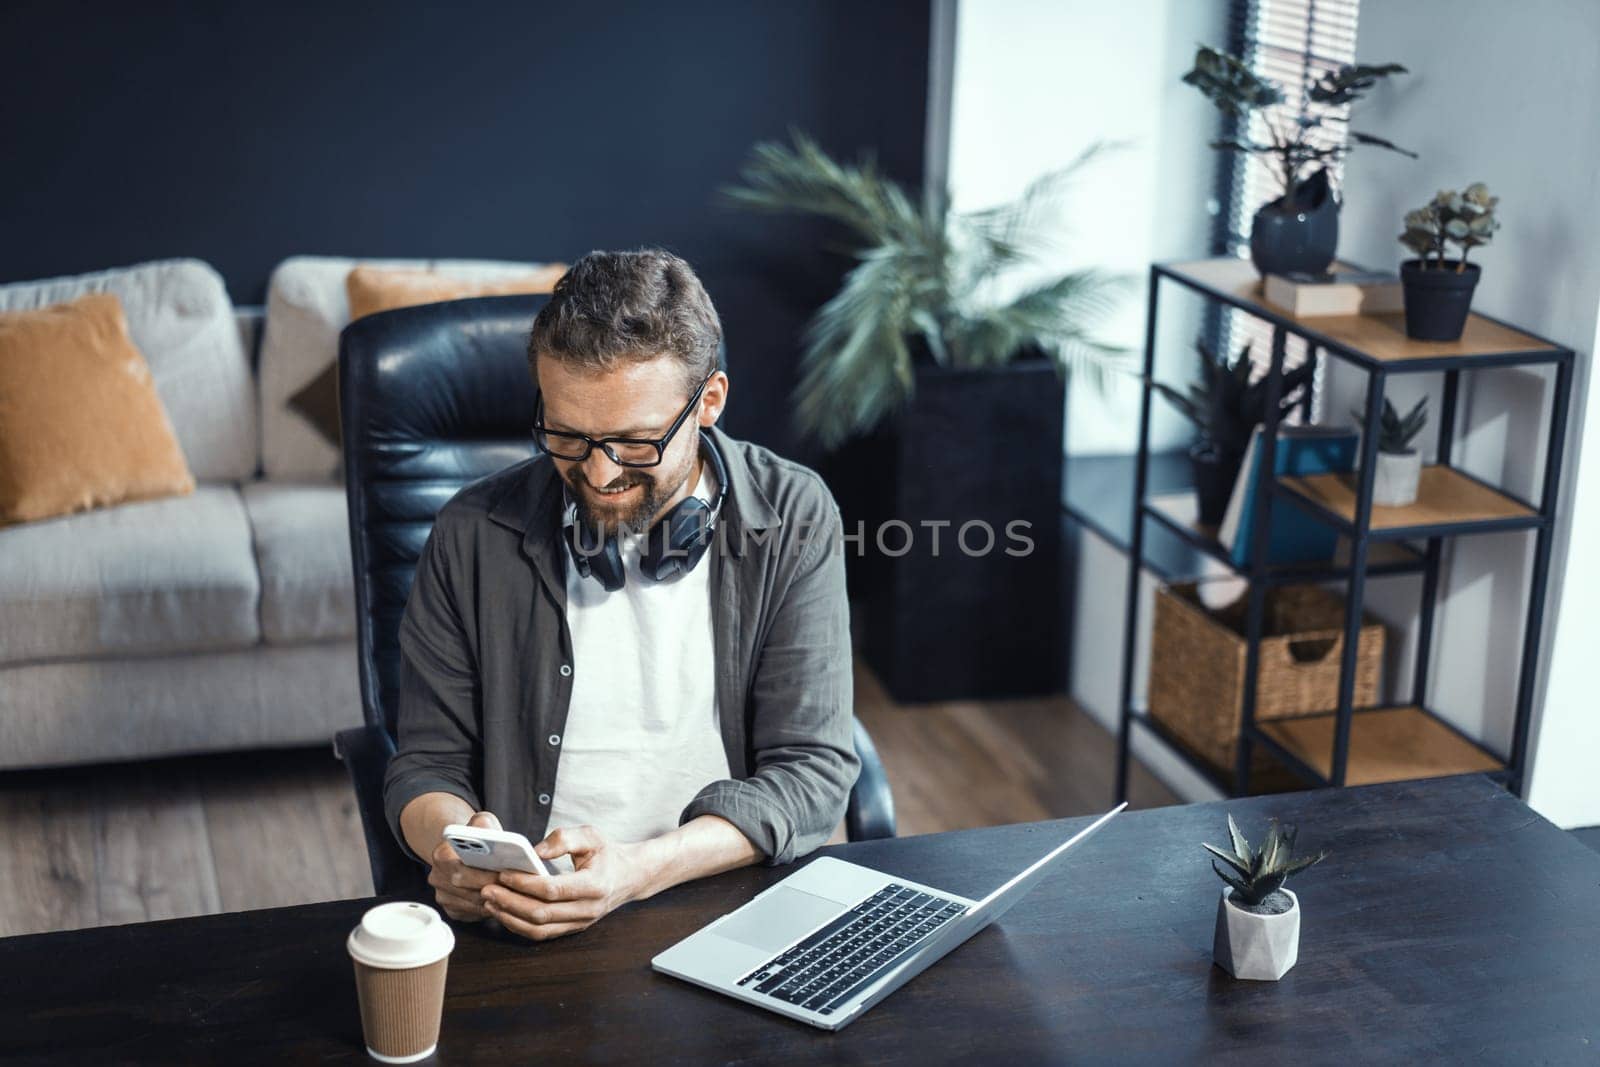 Concept of working from home, featuring mid-aged man working on laptop. Man seen in comfortable home office environment, highlighting convenience and benefits of working from comfort of one's own space by LipikStockMedia